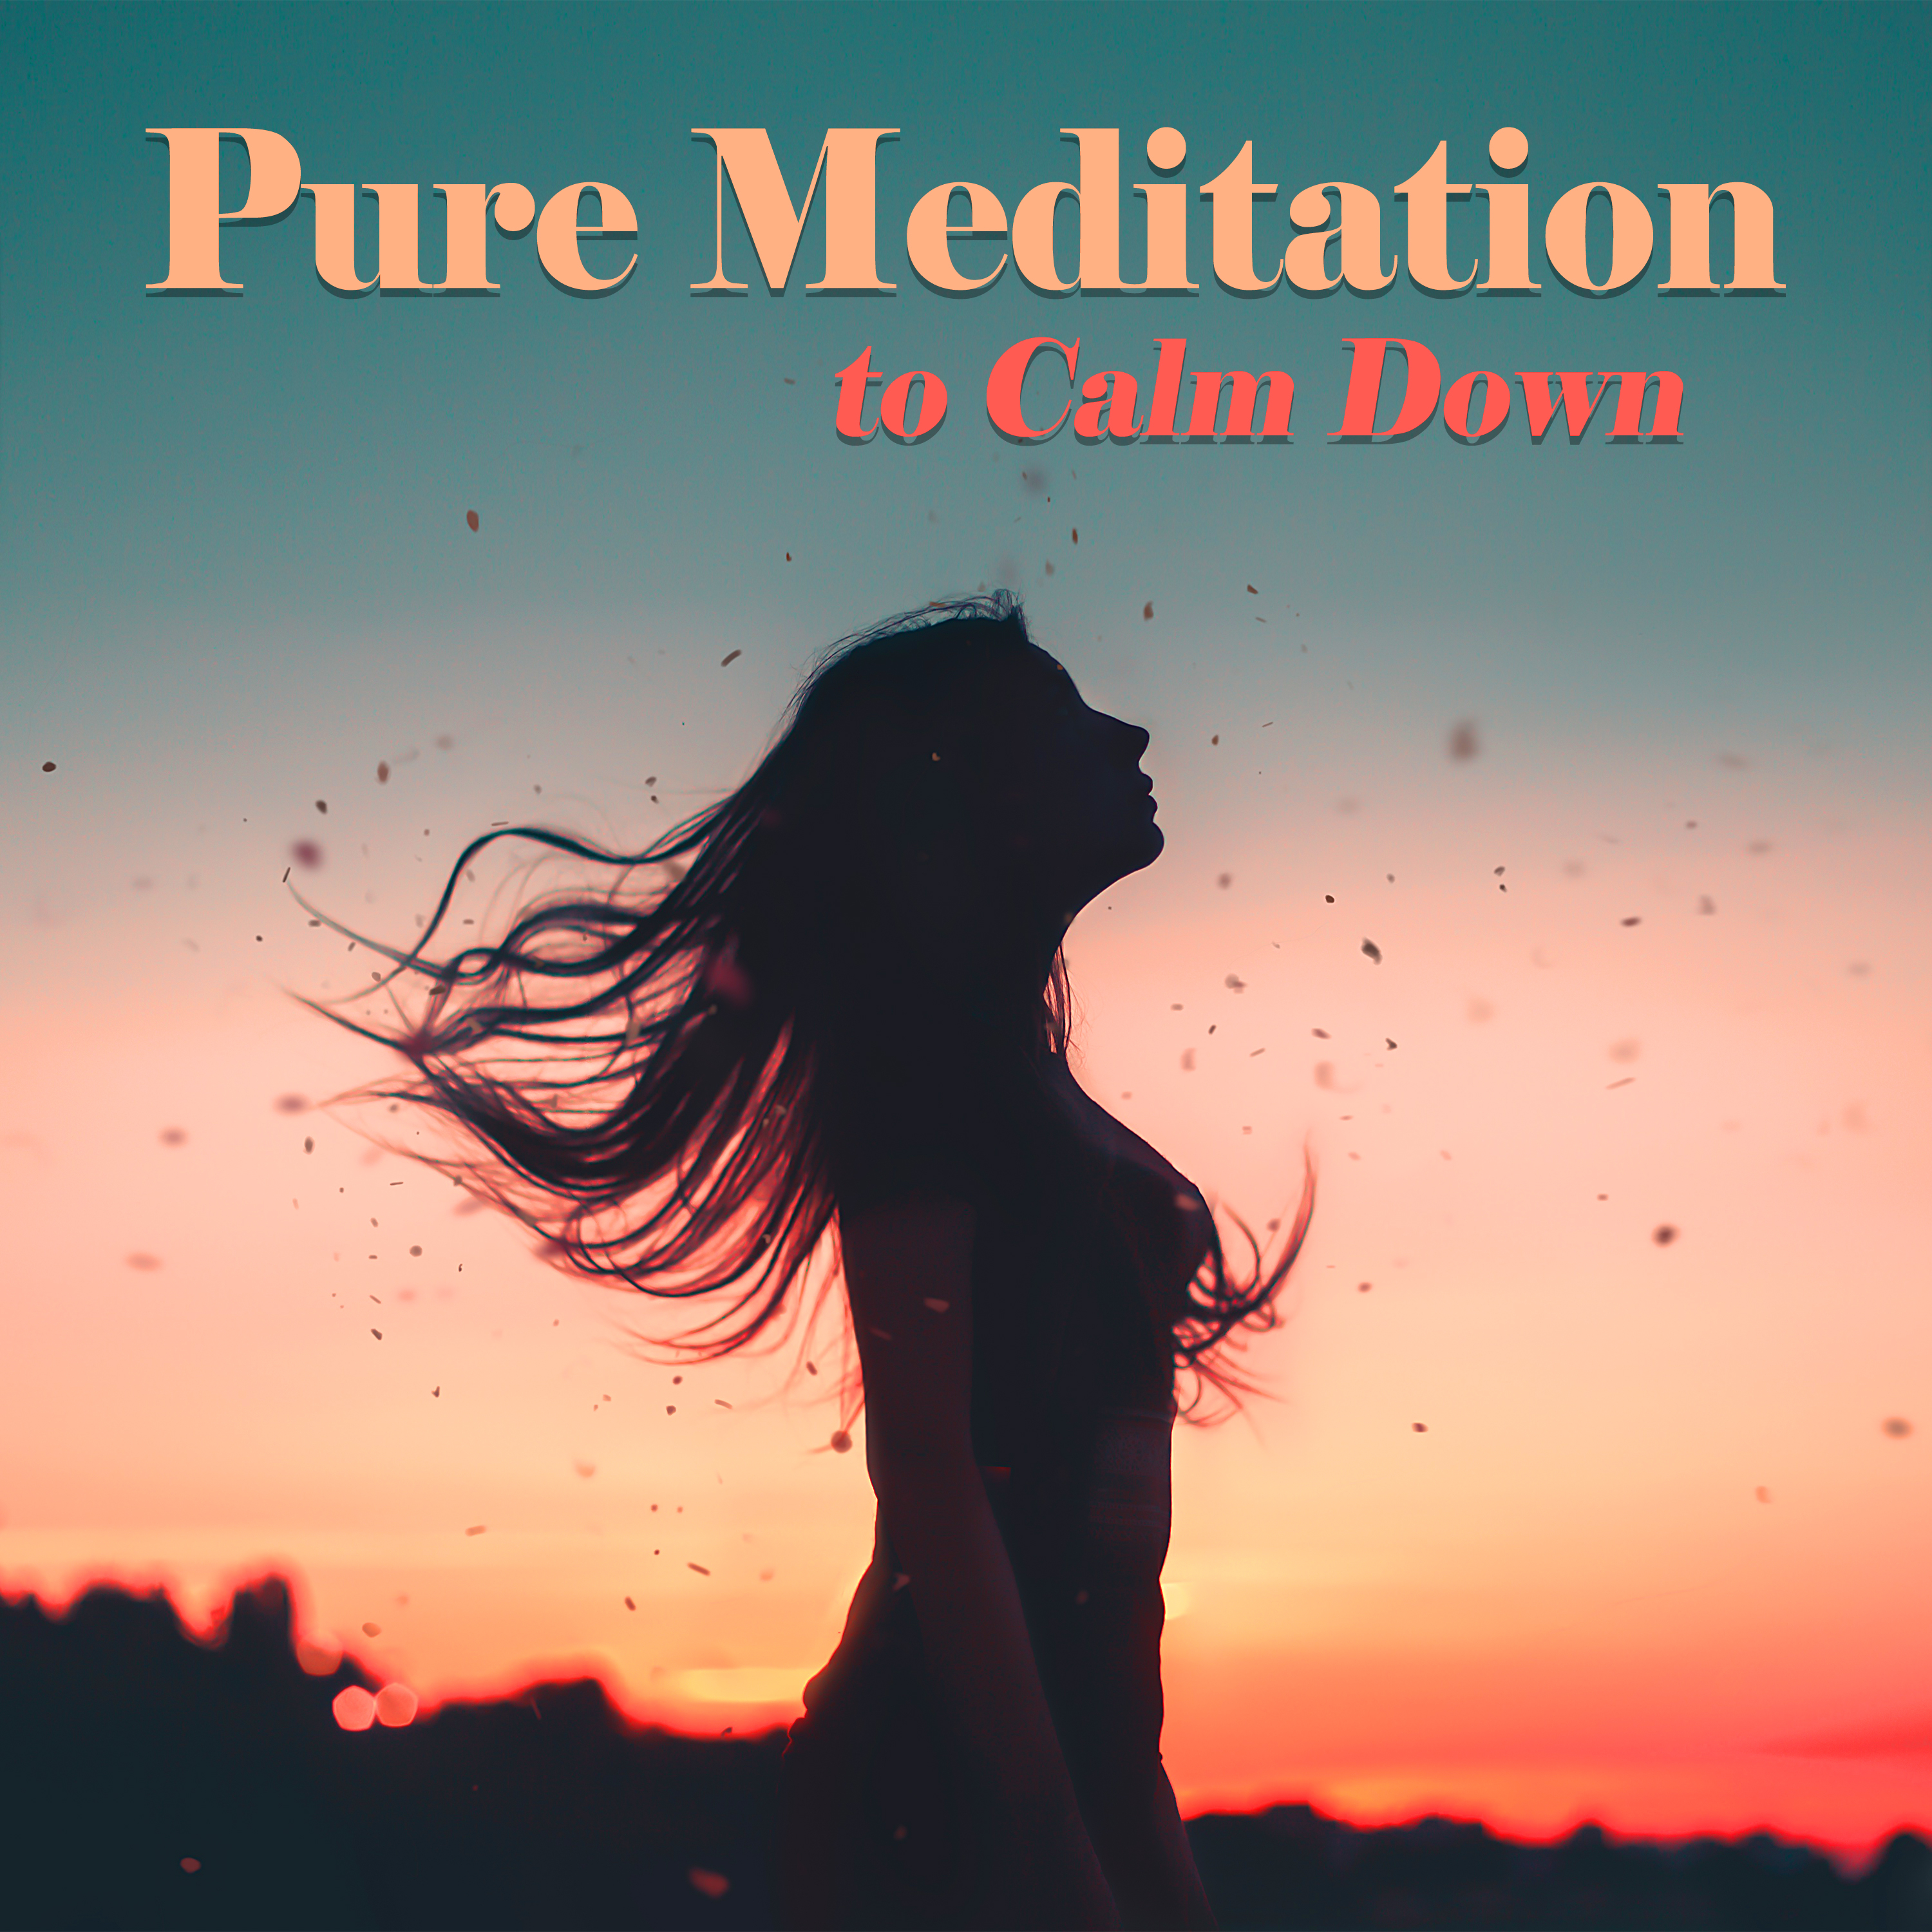 Pure Meditation to Calm Down